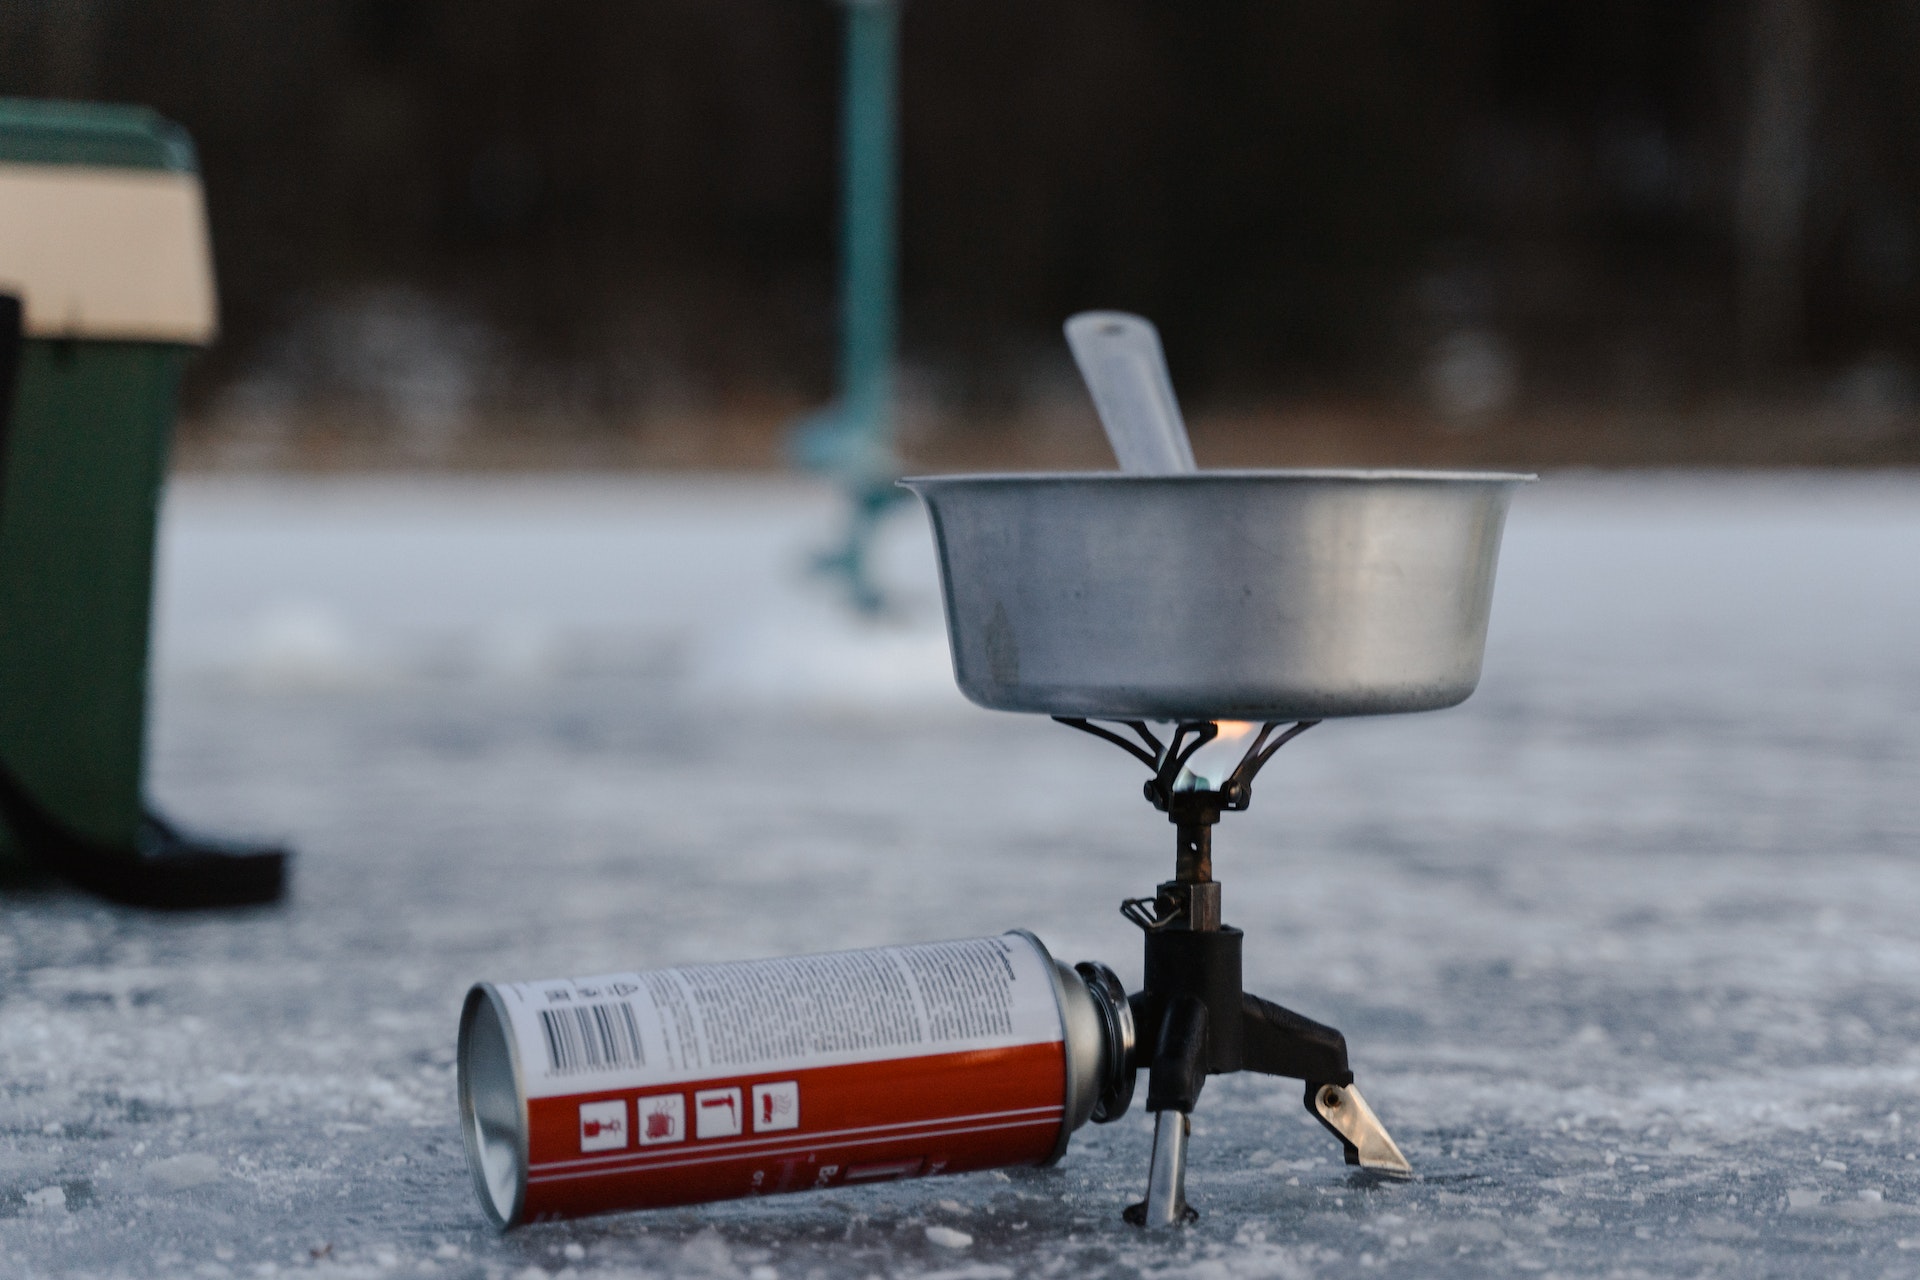 Backpacking stove in action